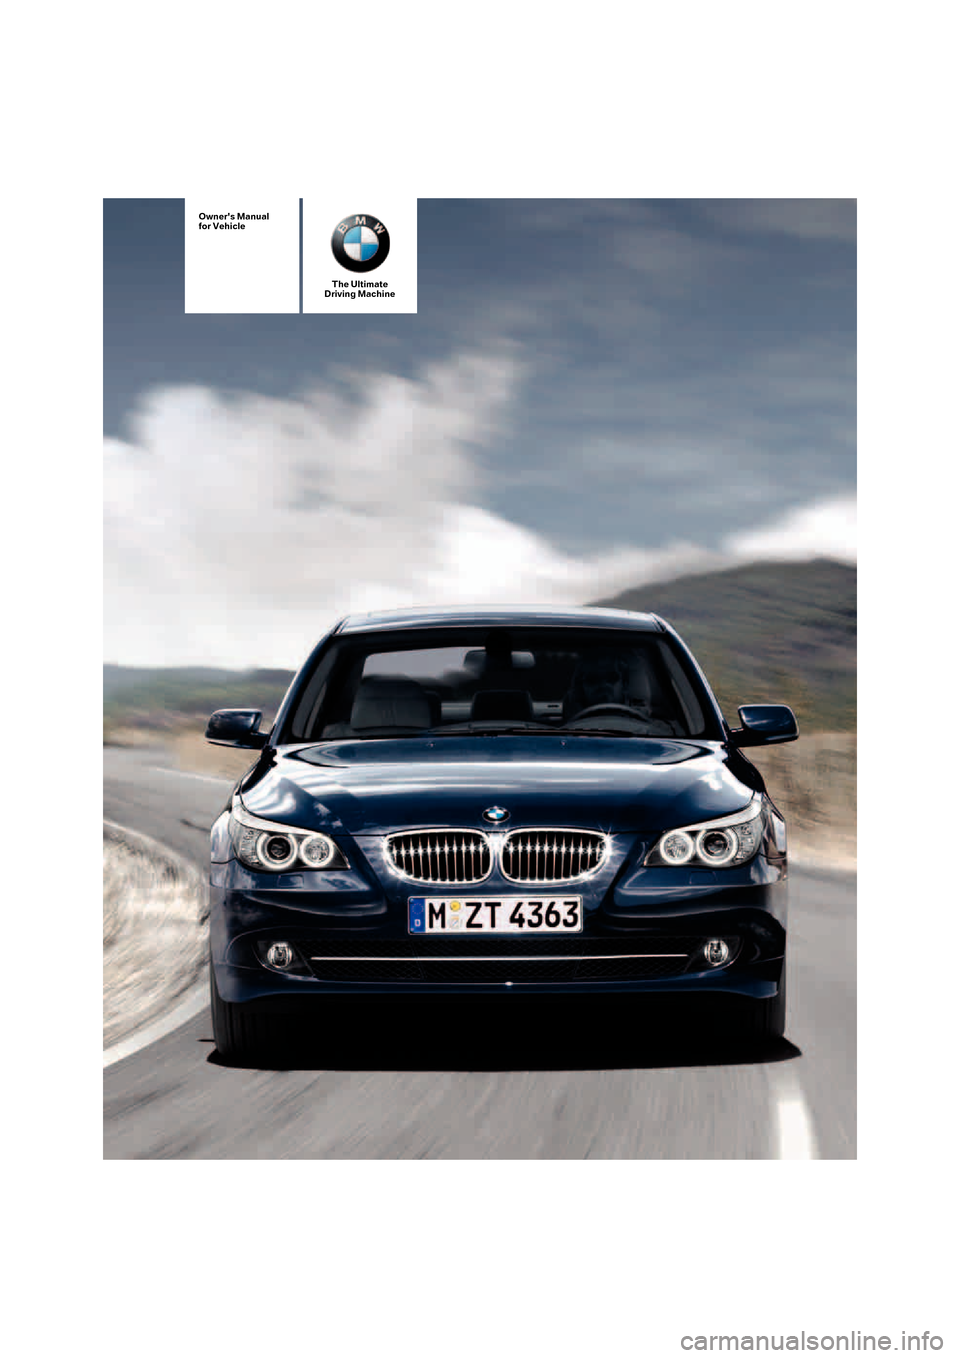 BMW 525XI TOURING 2007 E61 Owners Manual The Ultimate
Driving Machine
Owners Manual
for Vehicle 